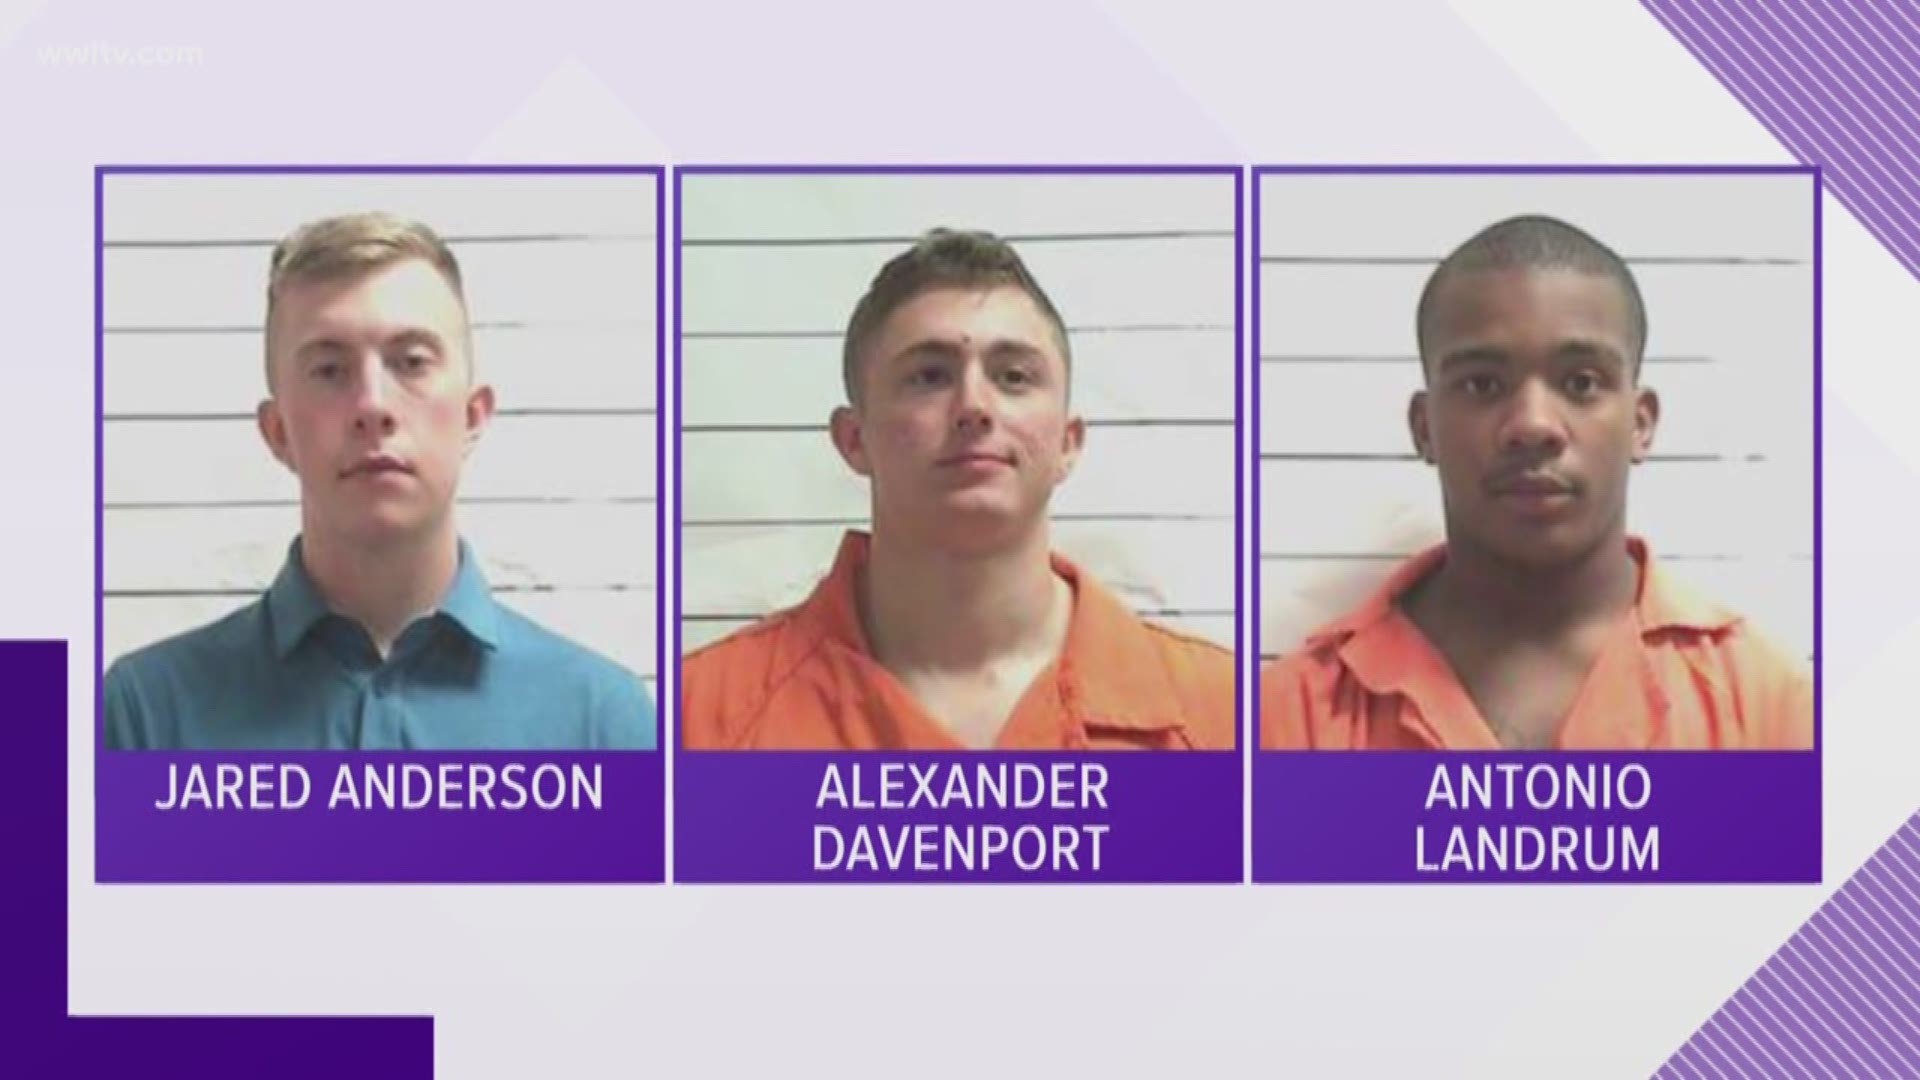 The district attorney's office has refused charges in the case of 3 marines and a Tulane student who were accused of a rape near the Tulane campus. 